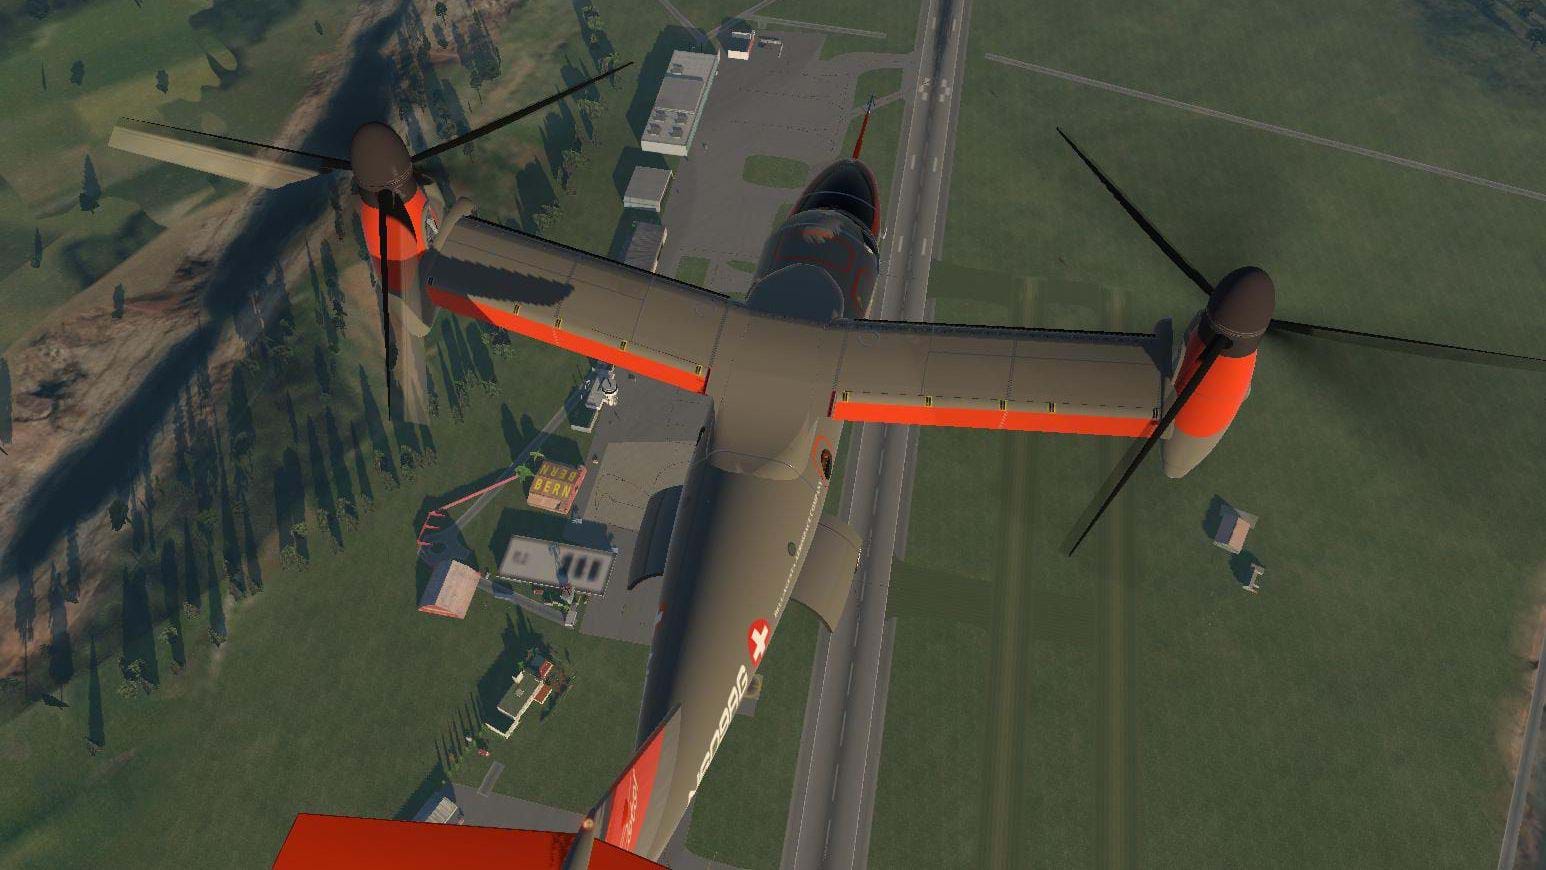 Pizzagalli AW-609 for X-Plane